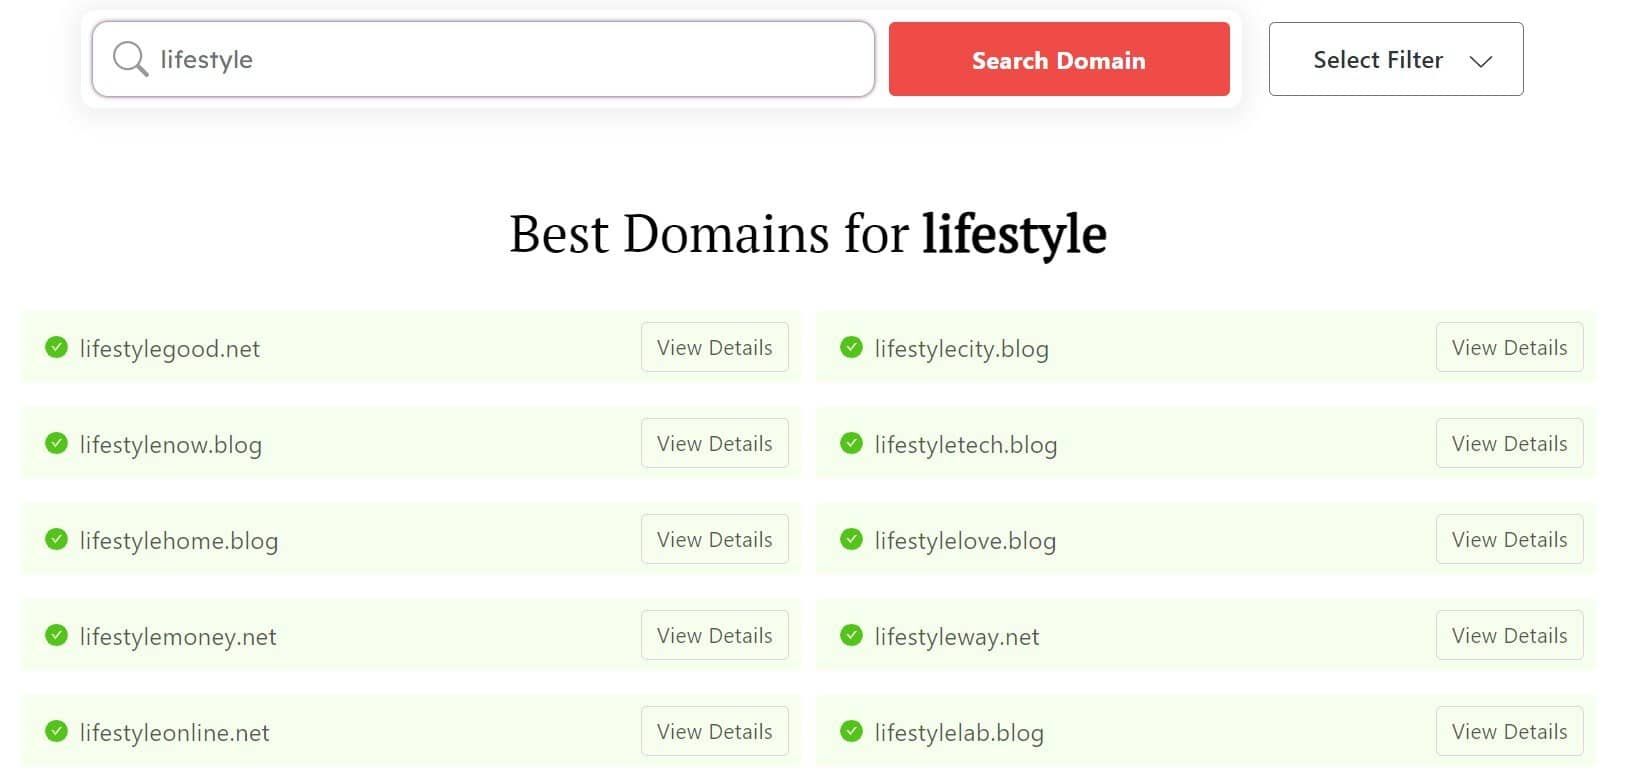 How to start a lifestyle blog: DomainWheel search for "lifestyle"